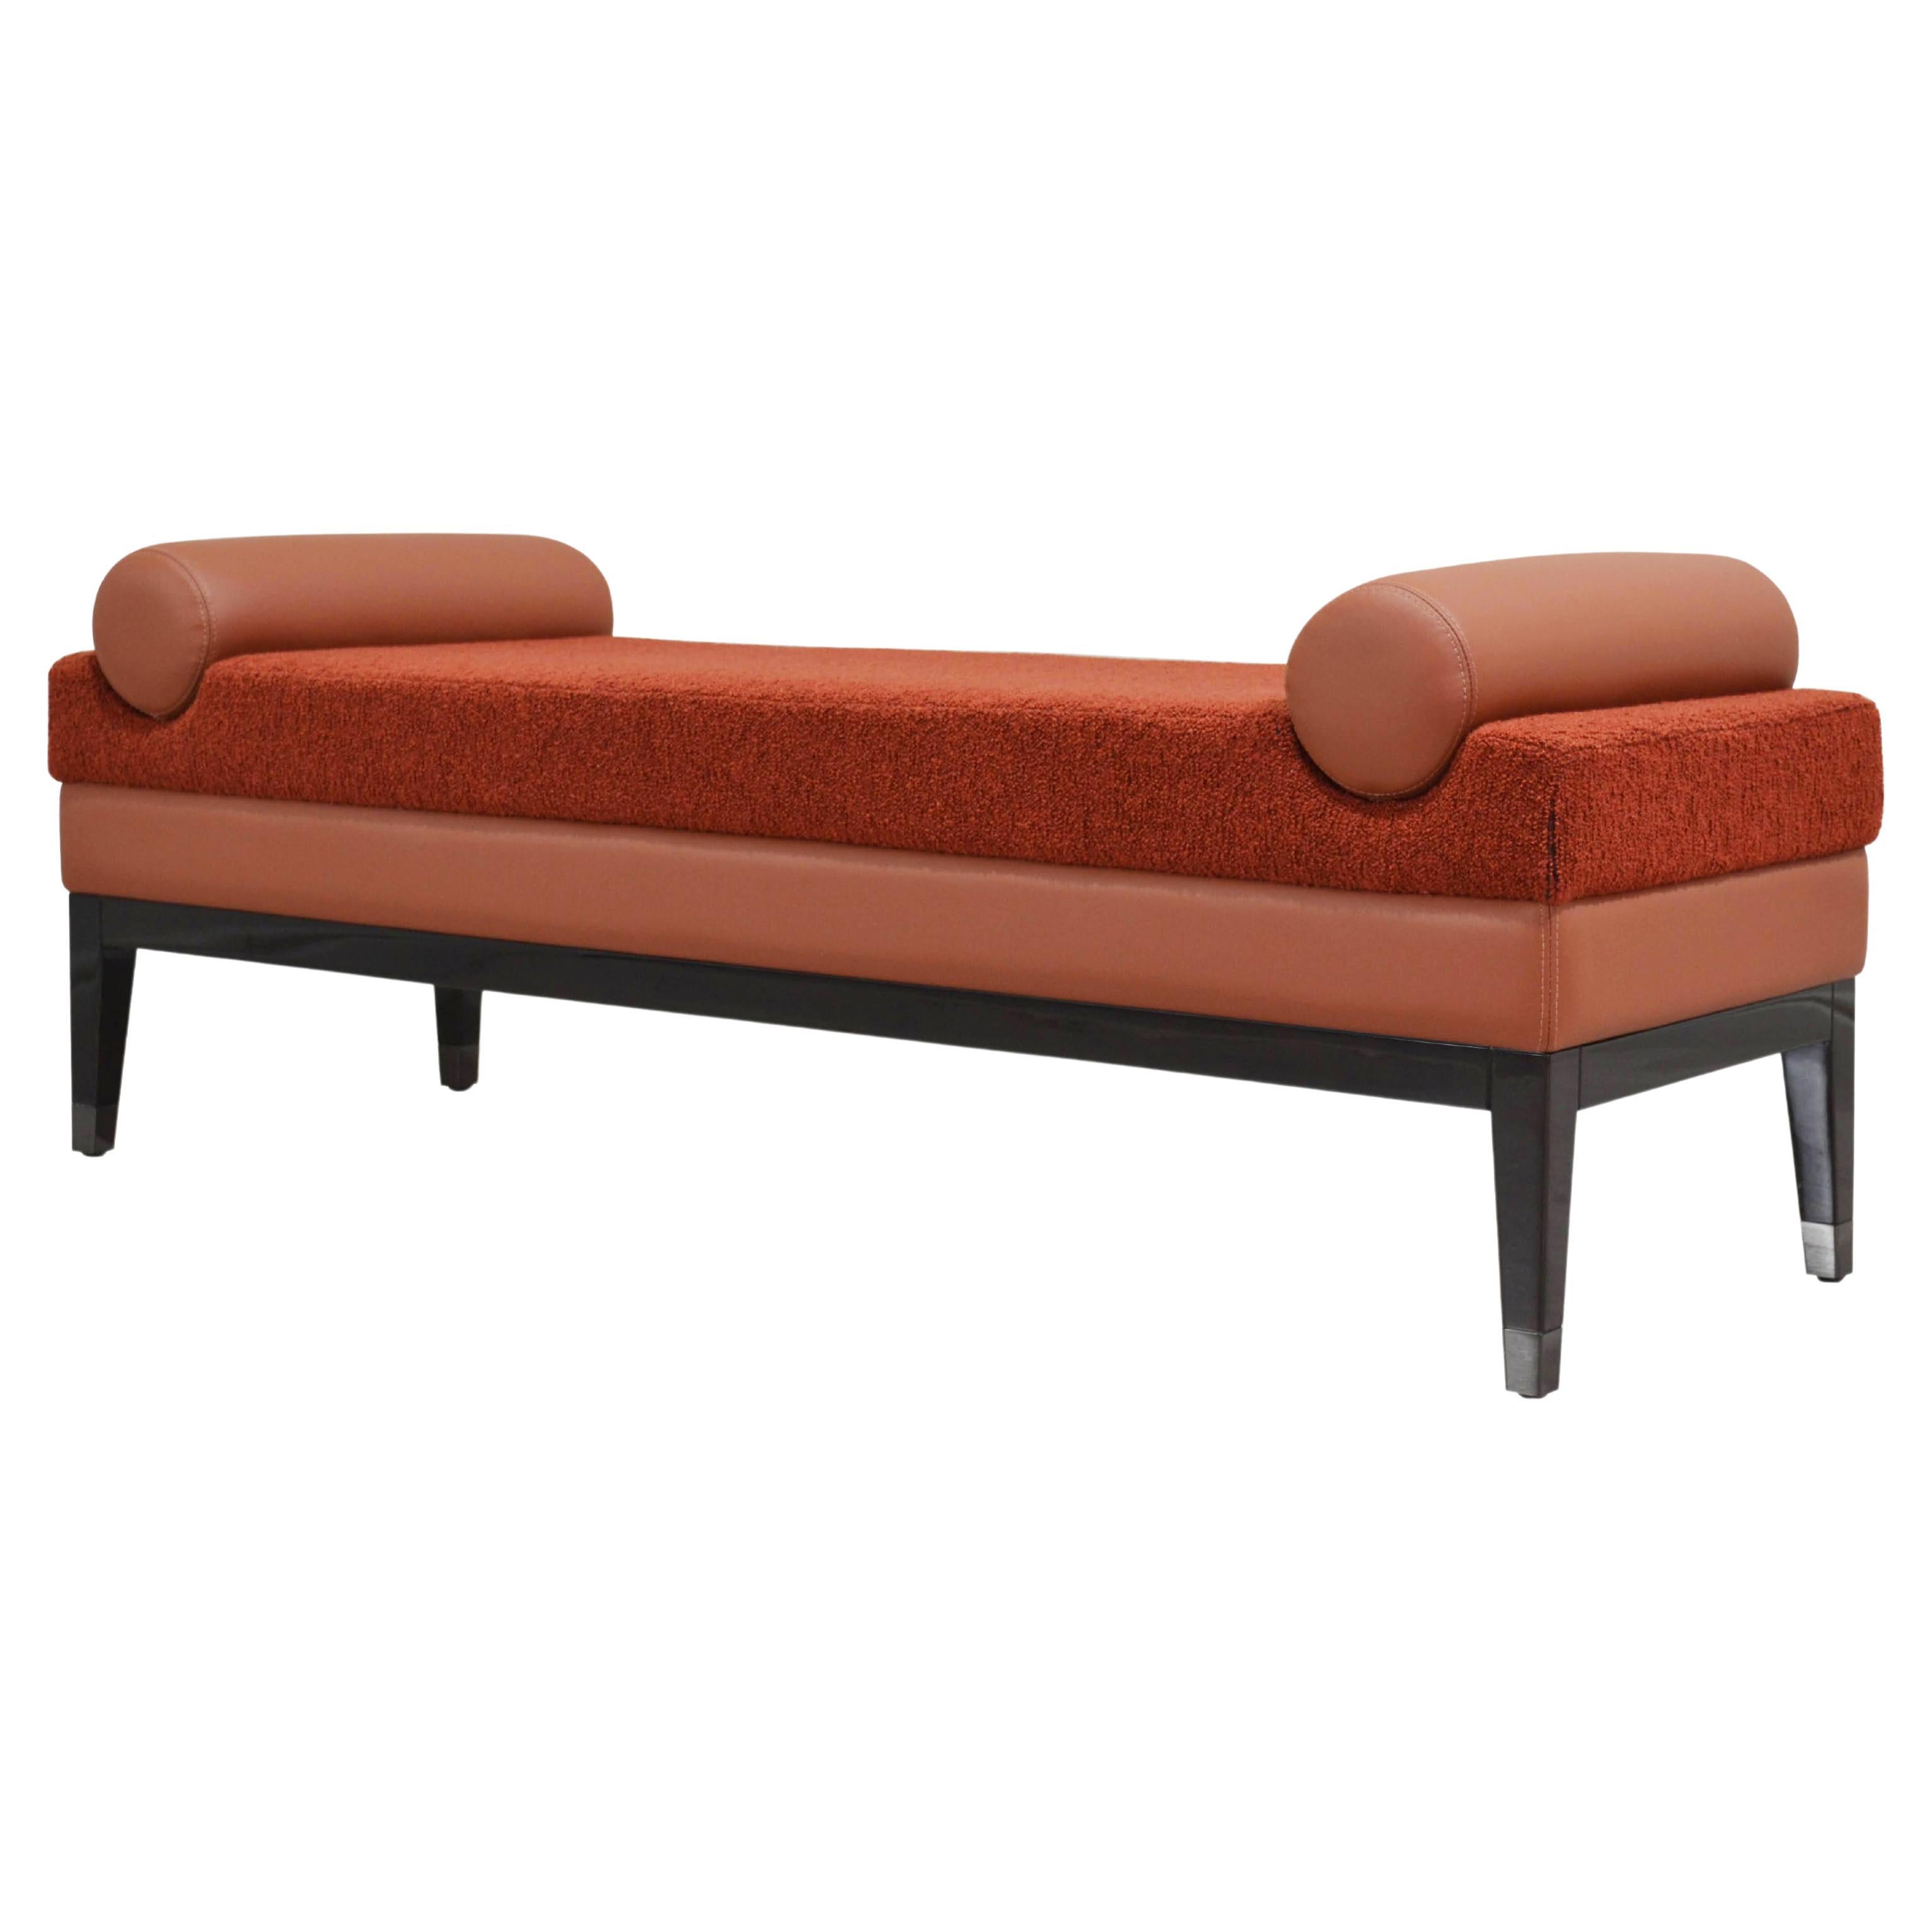 Italian Contemporary Upholstered Bench in Terracotta Fabric and Red Leather For Sale